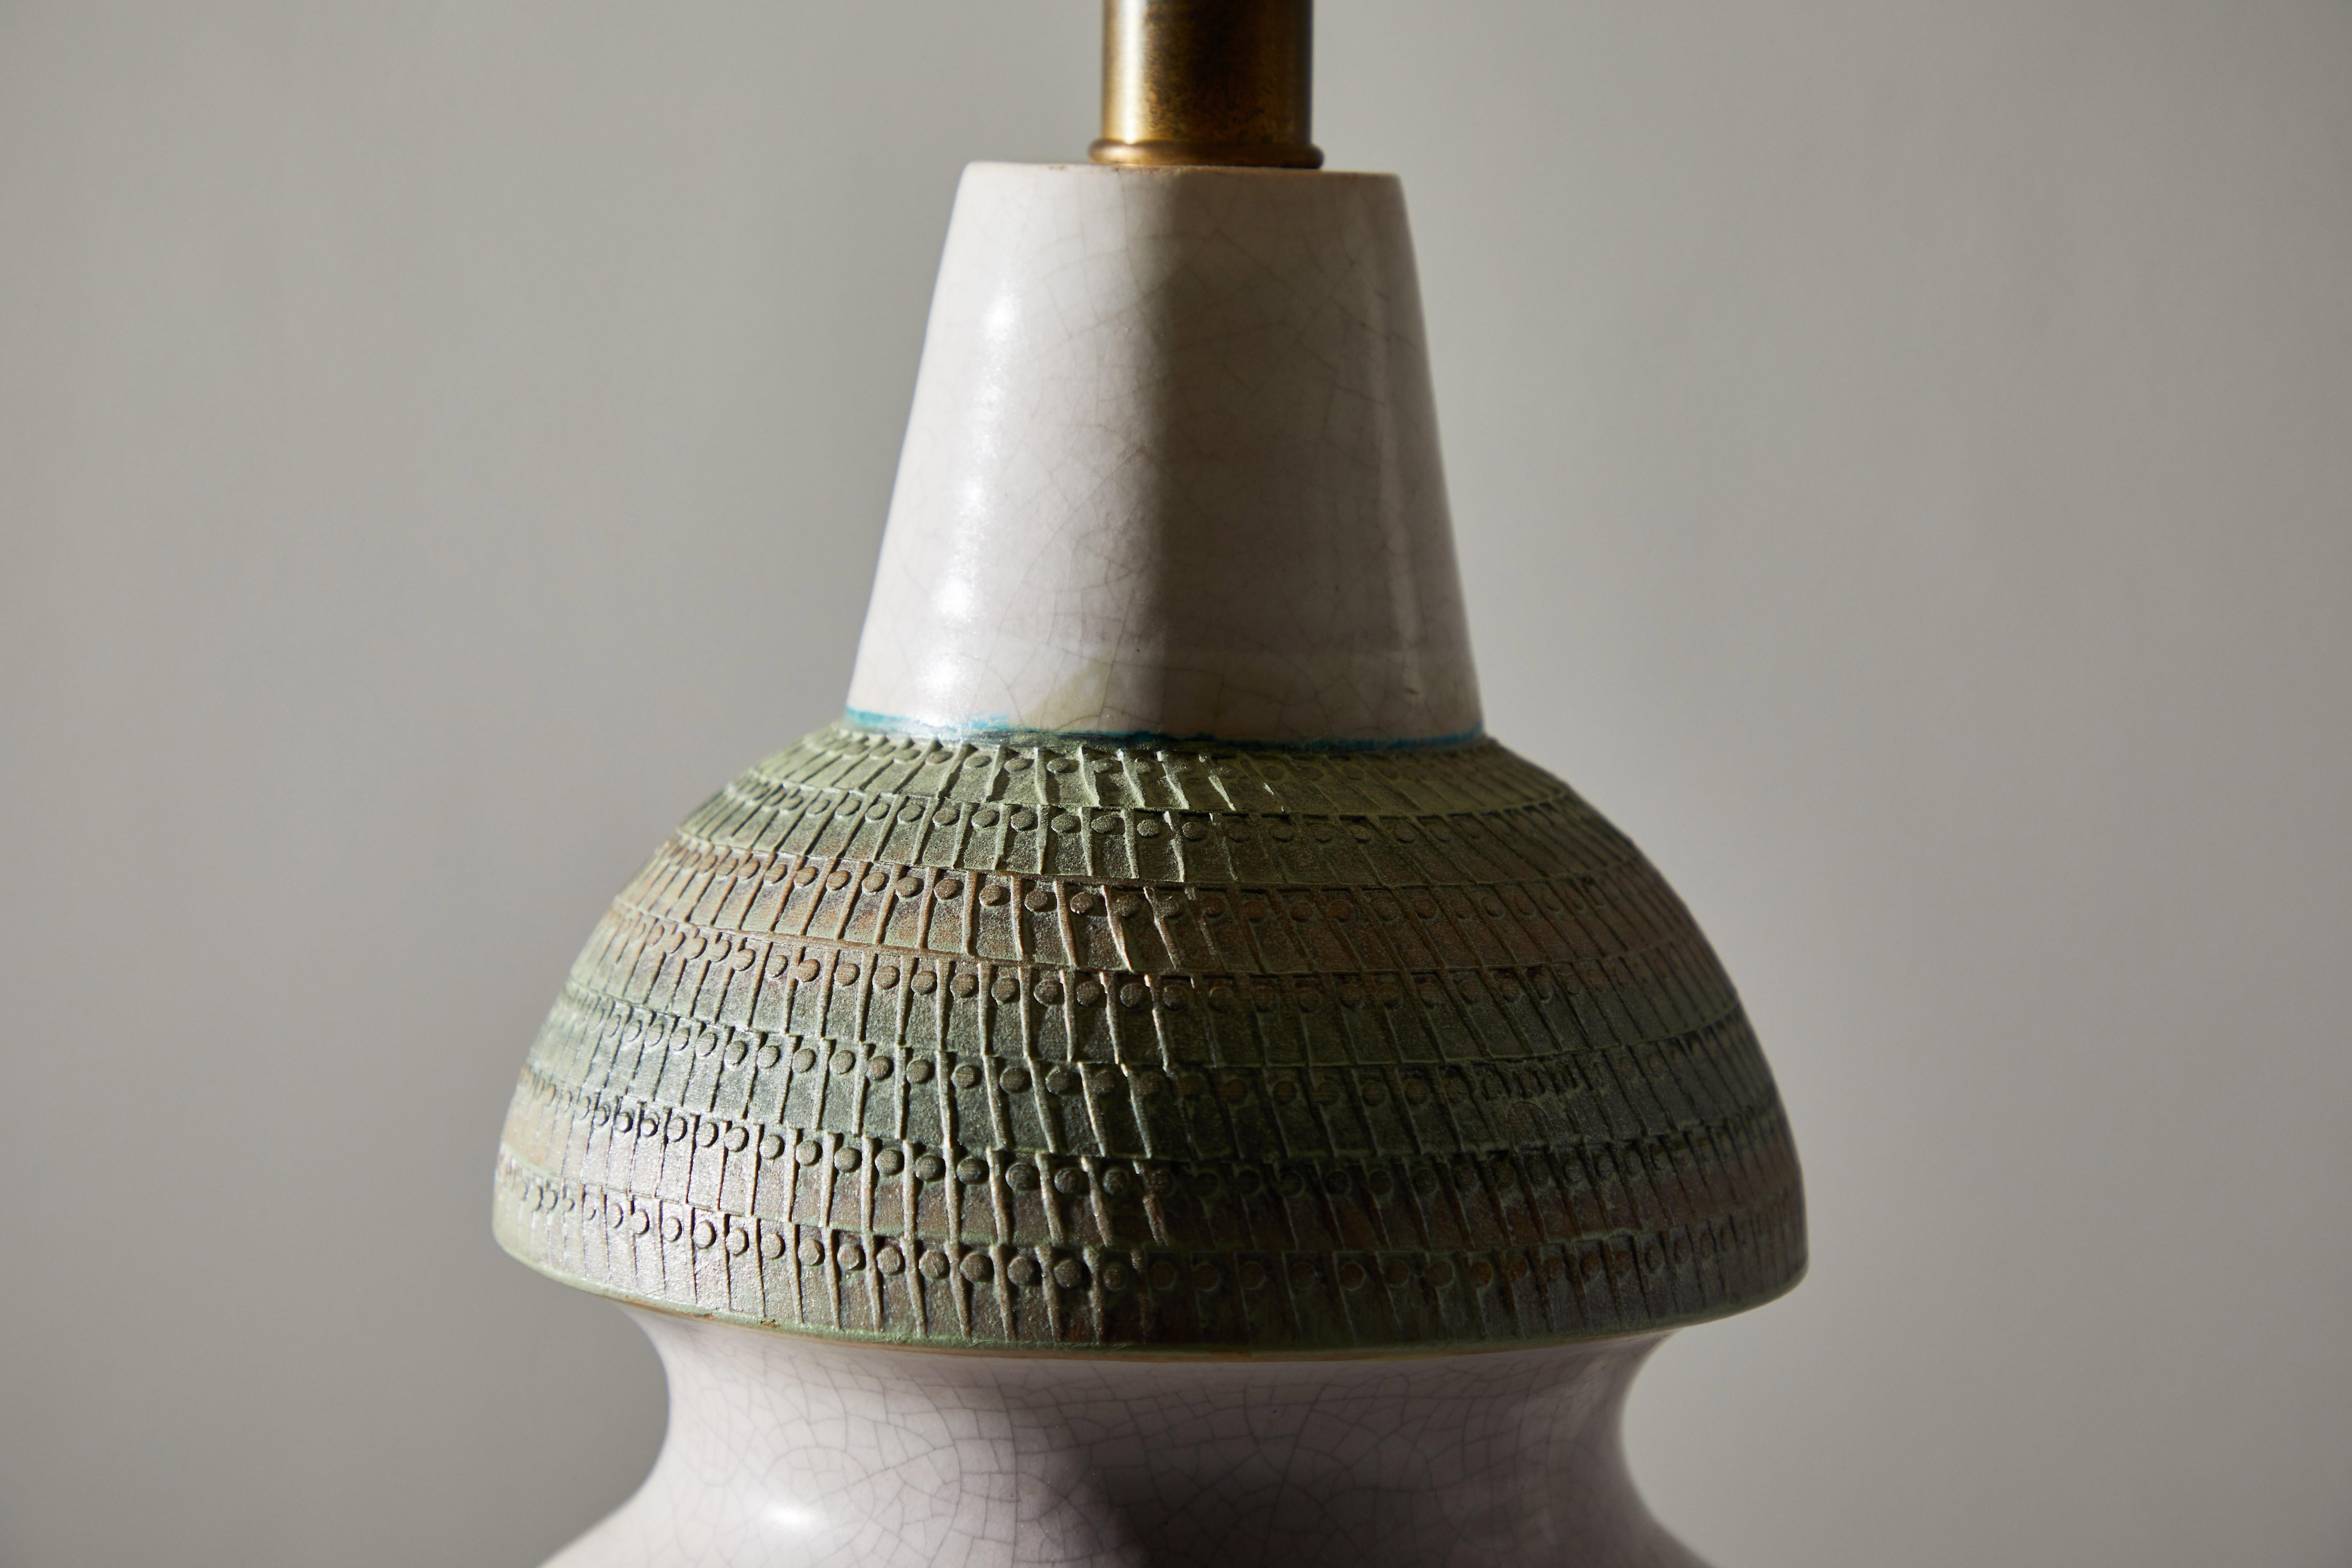 Ceramic Table Lamp by Bitossi